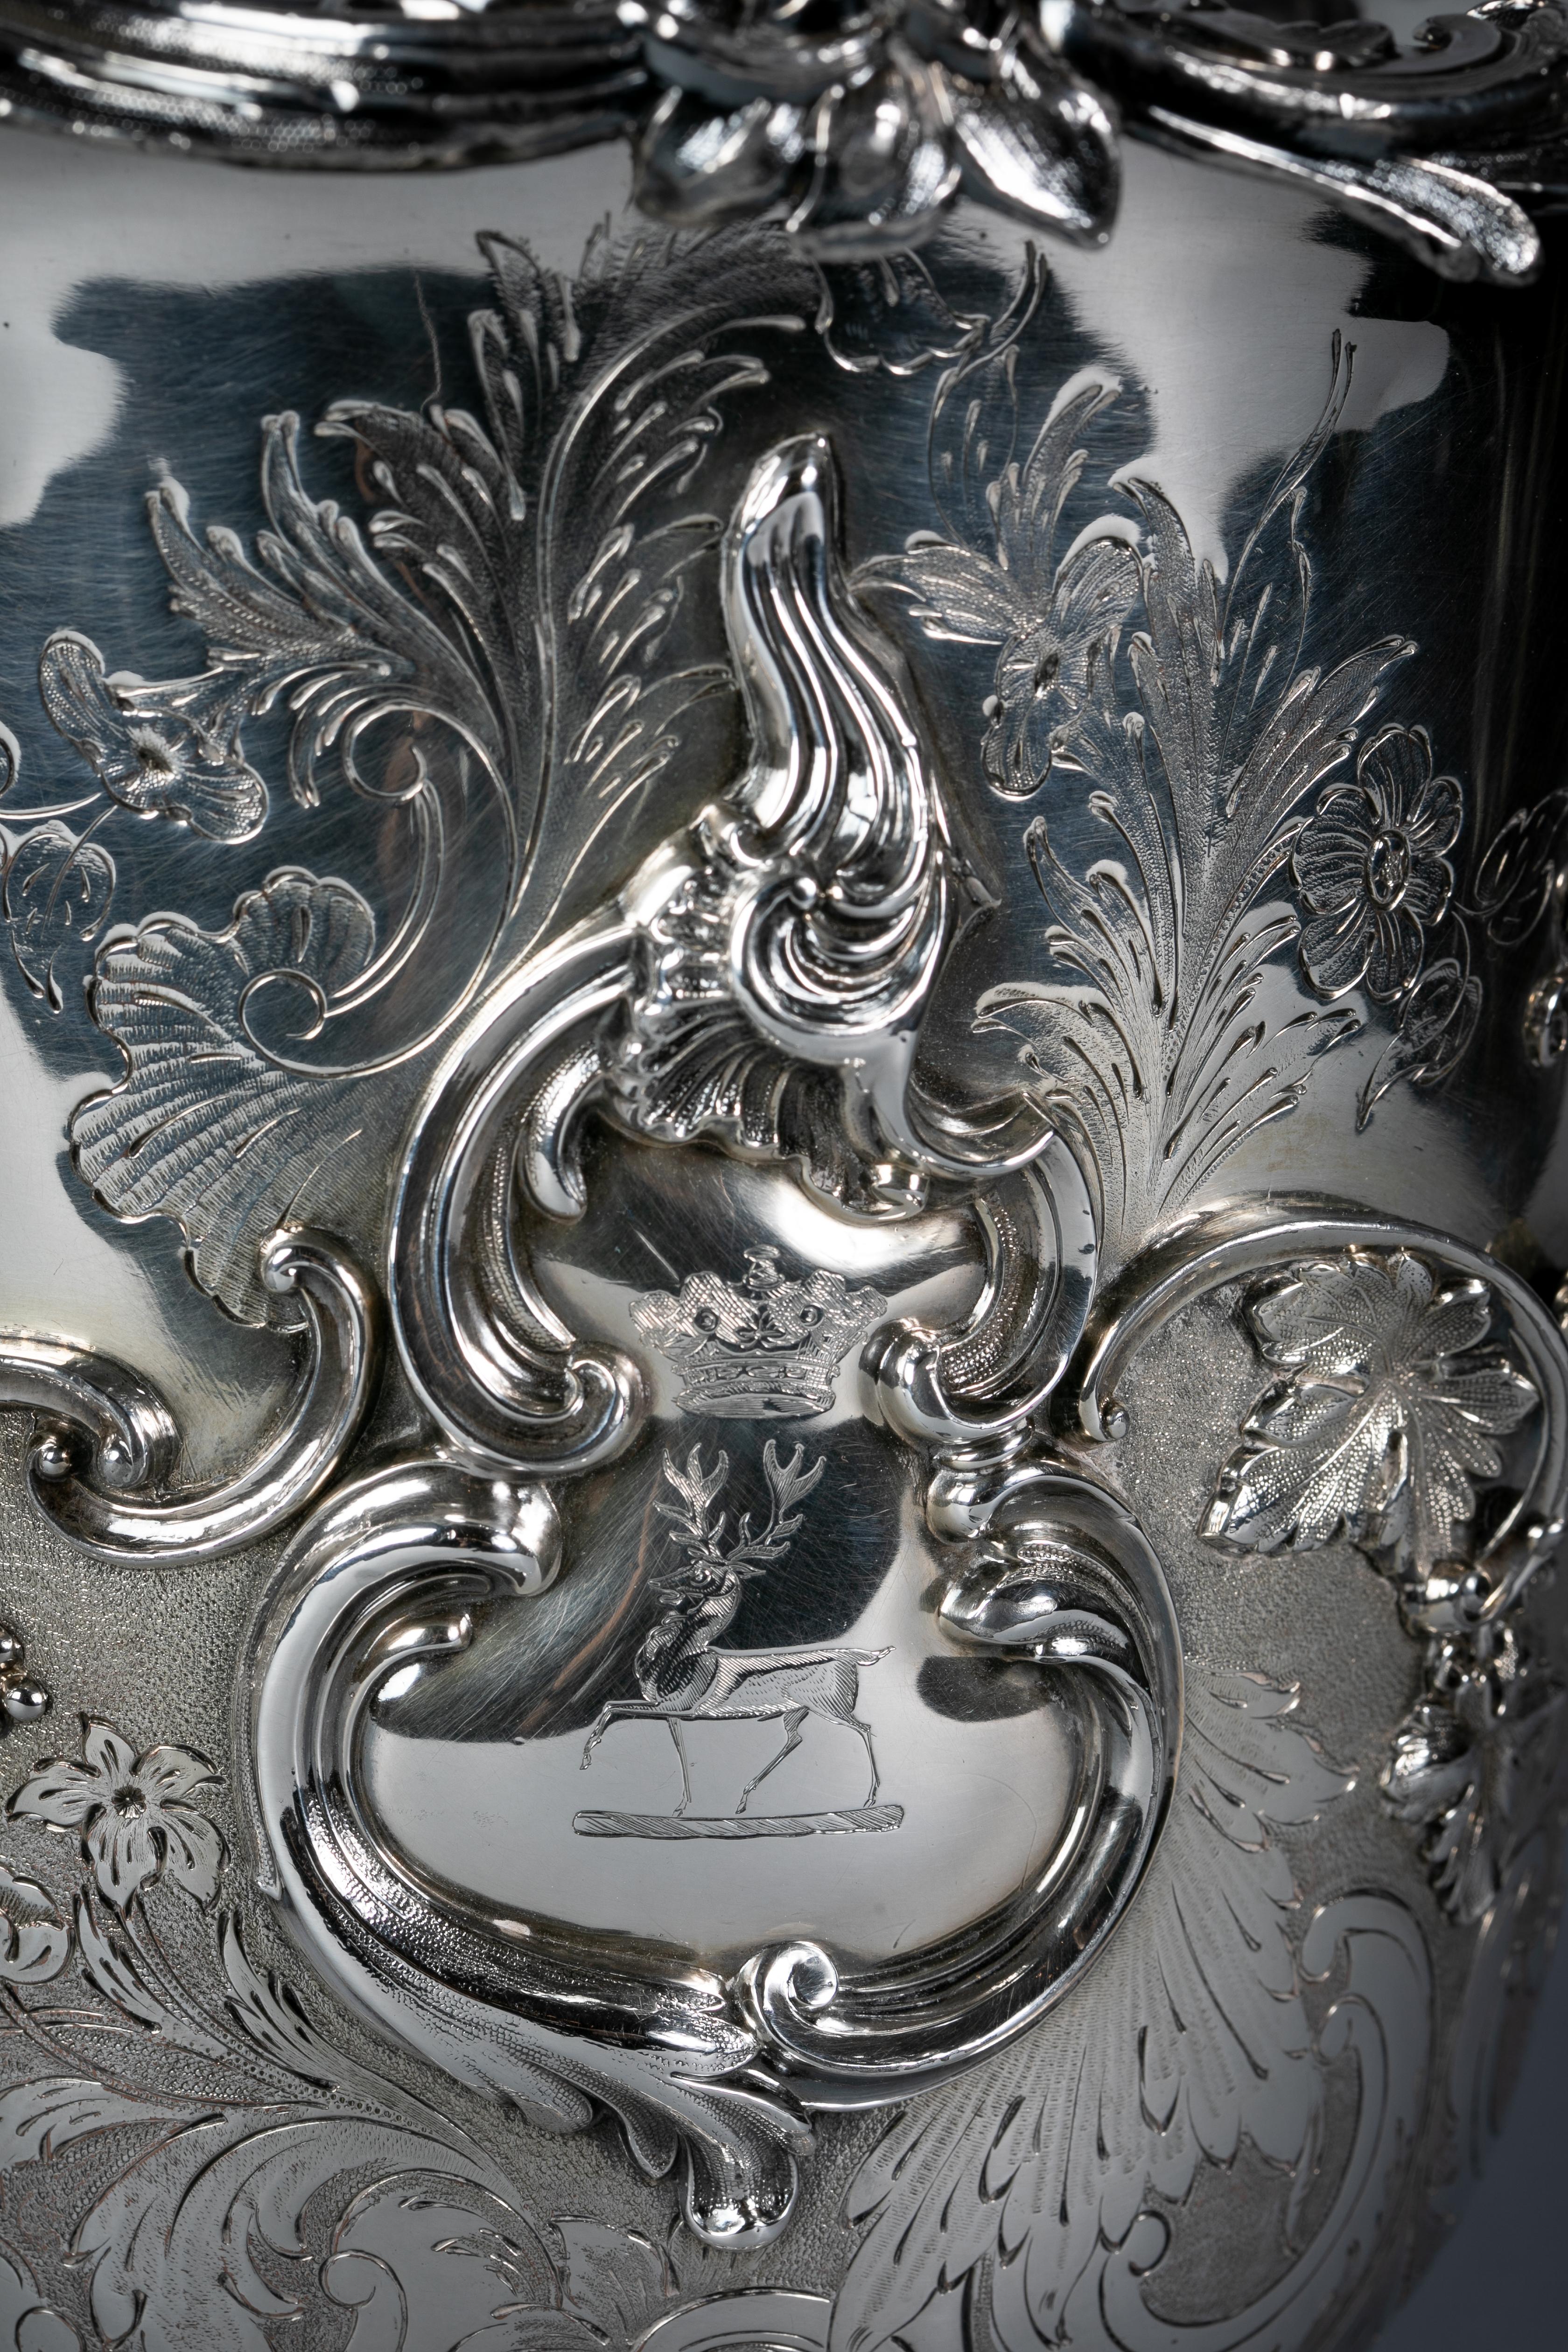 Boldly chased, engraved and applied with grape and vine decoration with the crests on either sides framed within a double-scrolled cartouche in high relief. The base with further scroll, leaf and floral decoration. The rim similarly decorated in